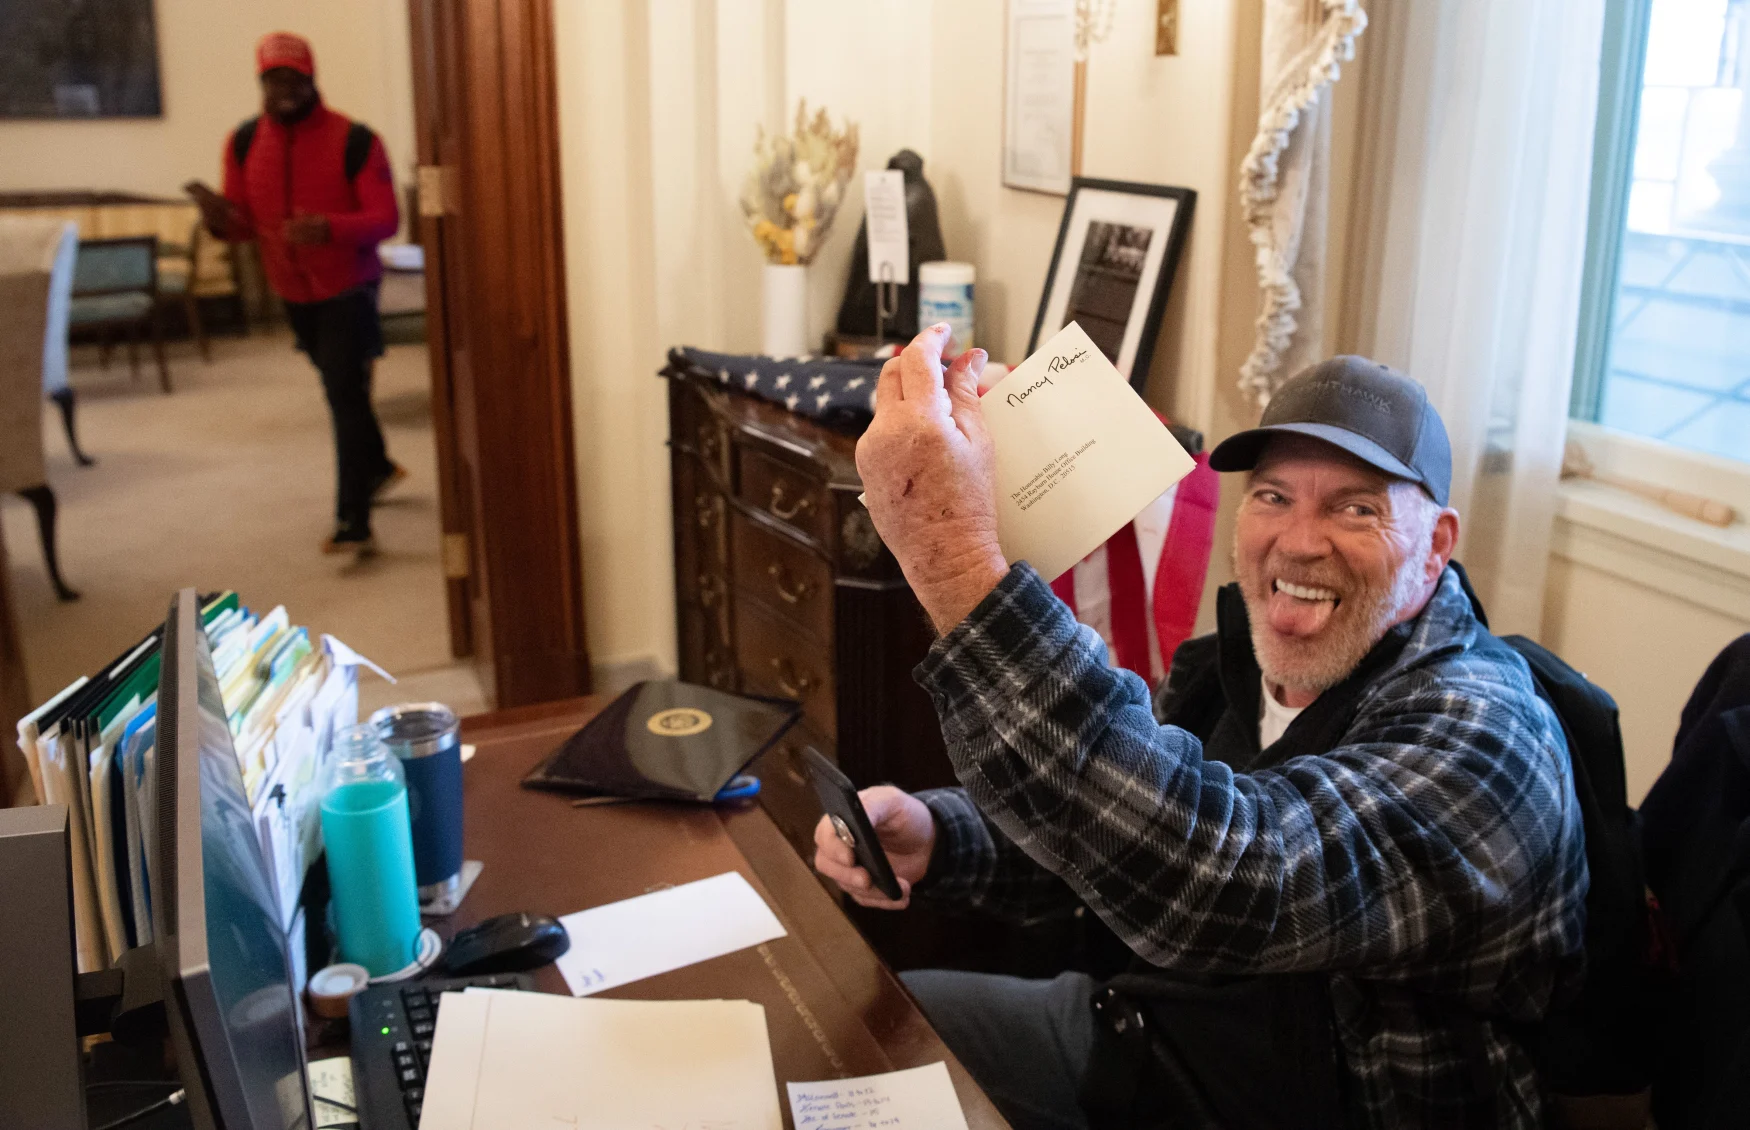 (FILES) Richard Barnett, a supporter of US President Donald Trump, holds a piece of mail as he sits inside the office of US Speaker of the House Nancy Pelosi after protestors breached the US Capitol in the US Capitol in Washington, DC, January 6, 2021. - Demonstrators breeched security and entered the Capitol as Congress debated the 2020 presidential election Electoral Vote Certification. (Photo by SAUL LOEB / AFP) (Photo by SAUL LOEB/AFP via Getty Images)